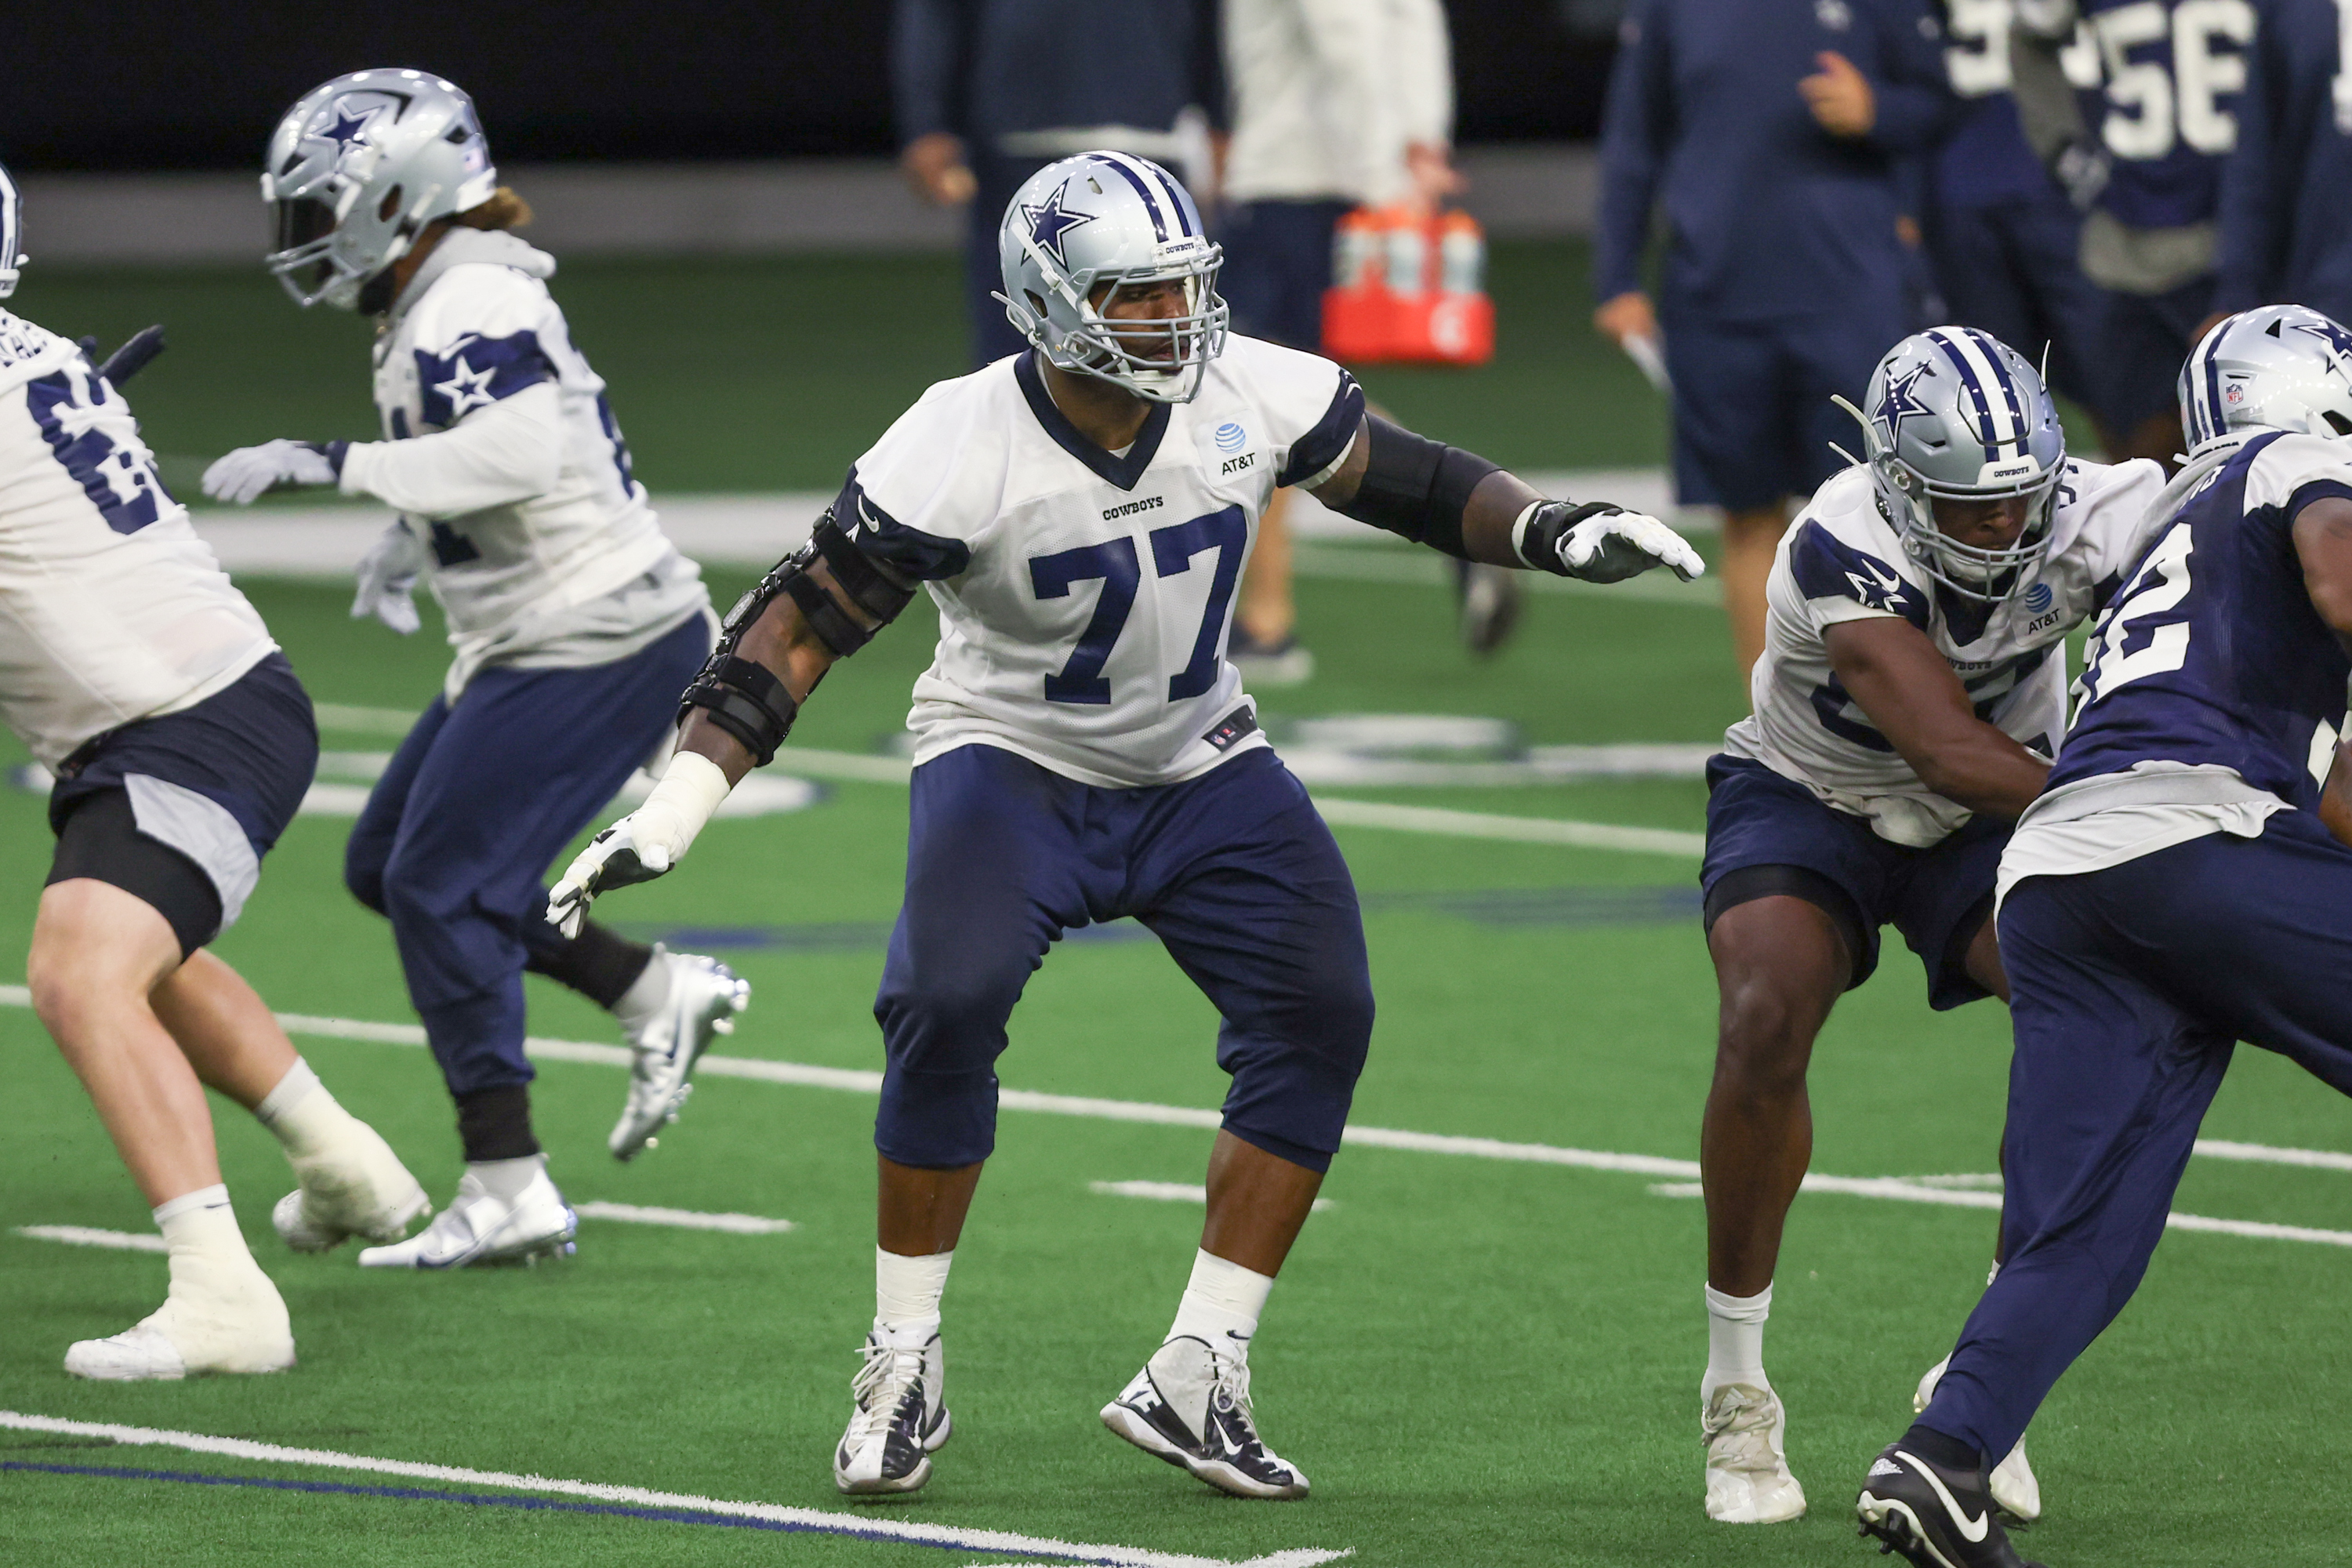 Dallas Cowboys tackle Tyron Smith (77) blocks during the Dallas Cowboys OTA Offseason Workouts on June 2, 2022 at The Star in Frisco, TX.